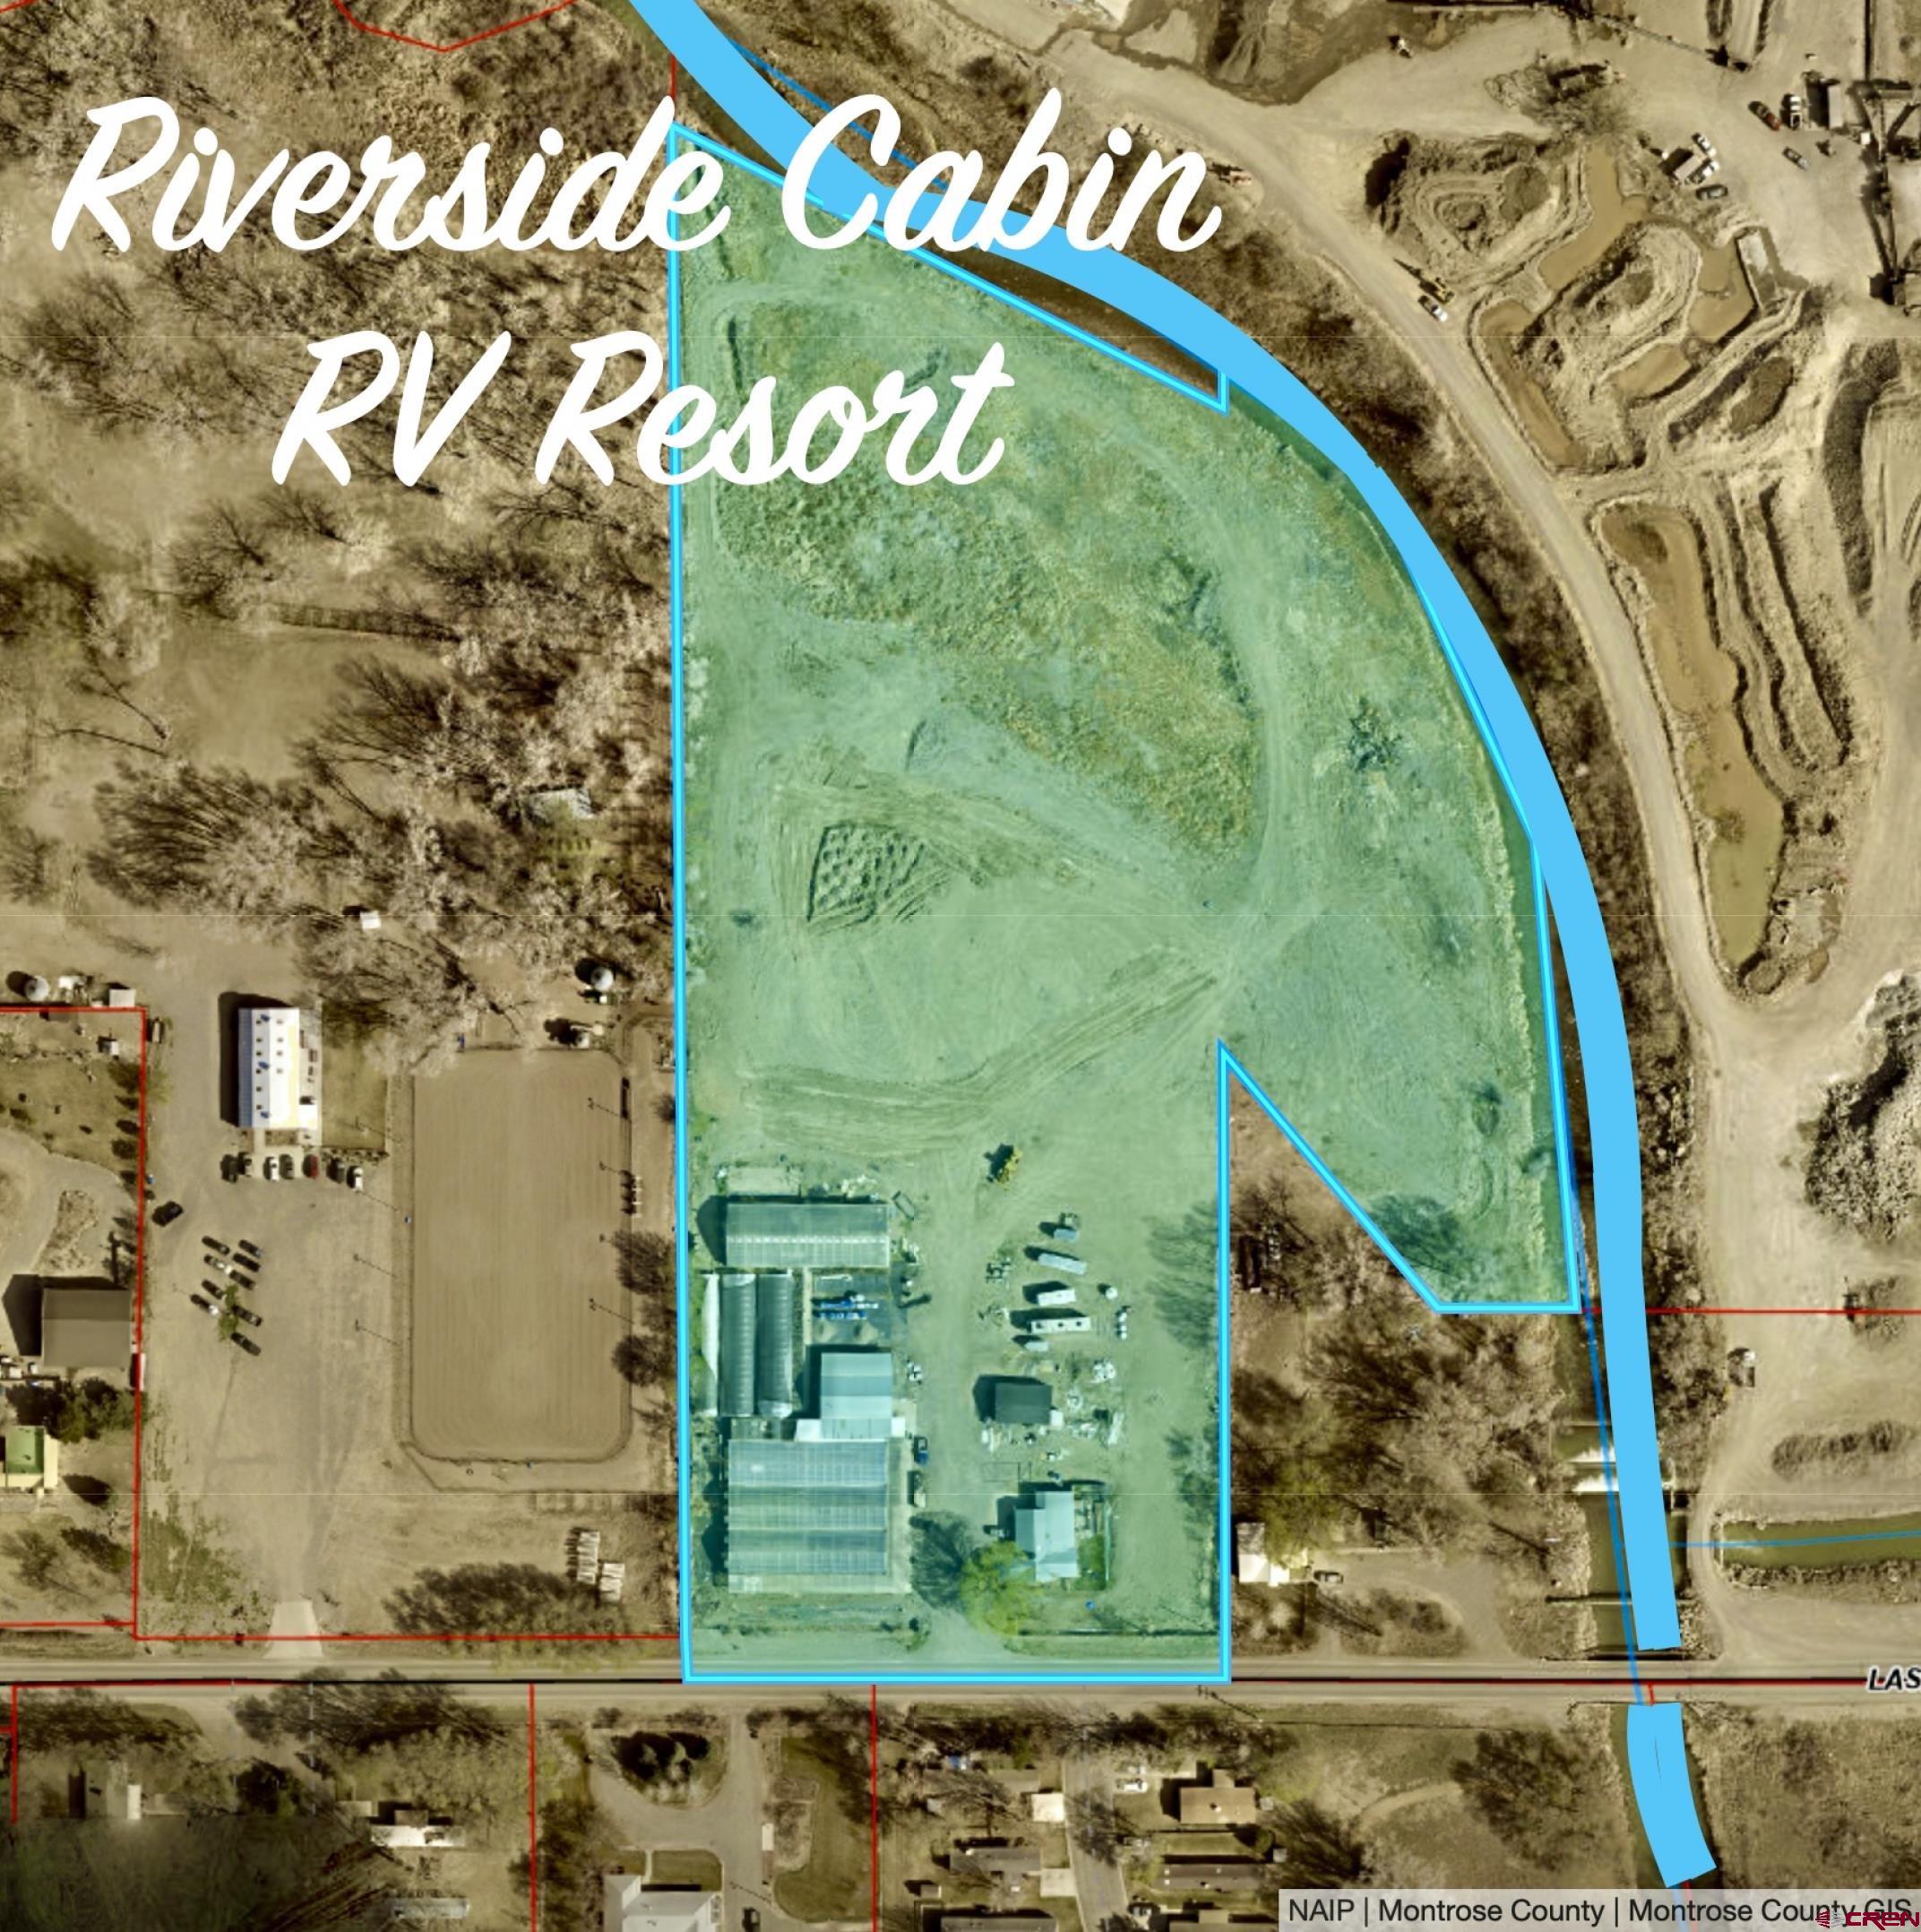 Cabinette RV resort on the Uncompahgre River!  Extremely rare, easy-access river frontage close to ¼ mile long, this property has multiple income opportunities and even fantastic fishing!  Plans have been approved by the county for up to 27 cabinette/RV spaces.  The first phase features one custom cabinette already built; septic is in permitting with an underground sewer line for the first 13 cabinettes, a nearby transformer, and water to the first 13 sites. The second phase of the project would allow for the additional spaces.  Completed is a 1-acre landscaped park irrigated all the way to the river.  Beyond the resort area is a partially remodeled 2,194 sq ft ranch home with a detached, heated garage (featuring new roof, siding, and ¾ bathroom), which would bring in great rental income.  In addition, the greenhouses offer more possibilities with heated office and warehouse space.  Check out the massive triple greenhouse with an impressive 8,600 sq ft of space, plus three 100’ hoop houses (two heated) and a heated 4,300 sq ft water wall greenhouse.  There is also a gas line to the greenhouses.  Please ask your agent for specifics on the use types.  This is the type of property you must visit in person to appreciate, so please schedule a showing today.